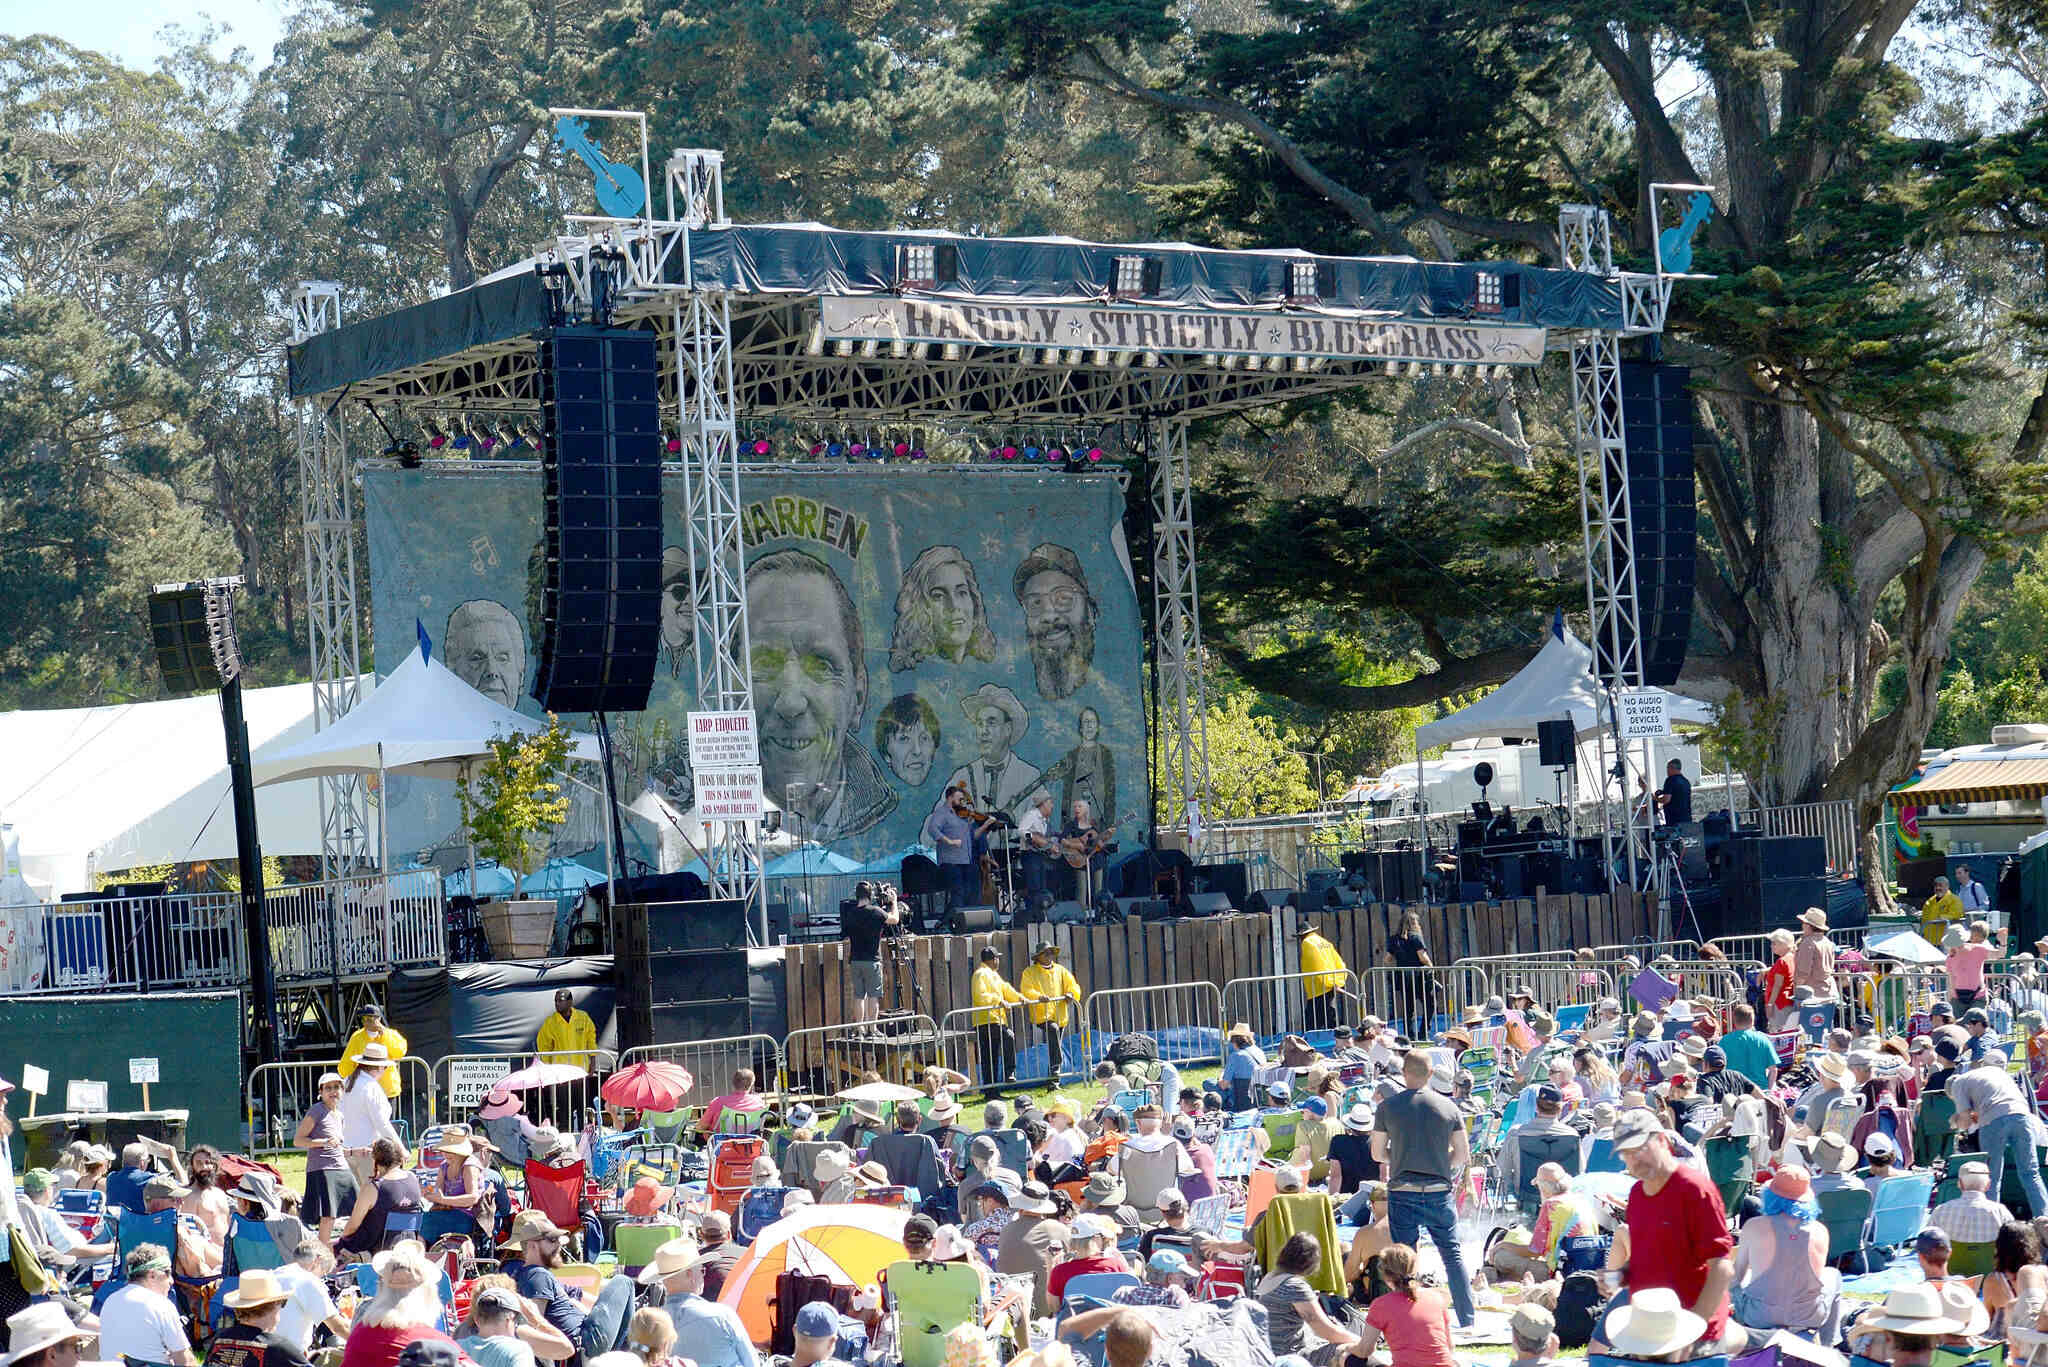 12-facts-about-hardly-strictly-bluegrass-festival